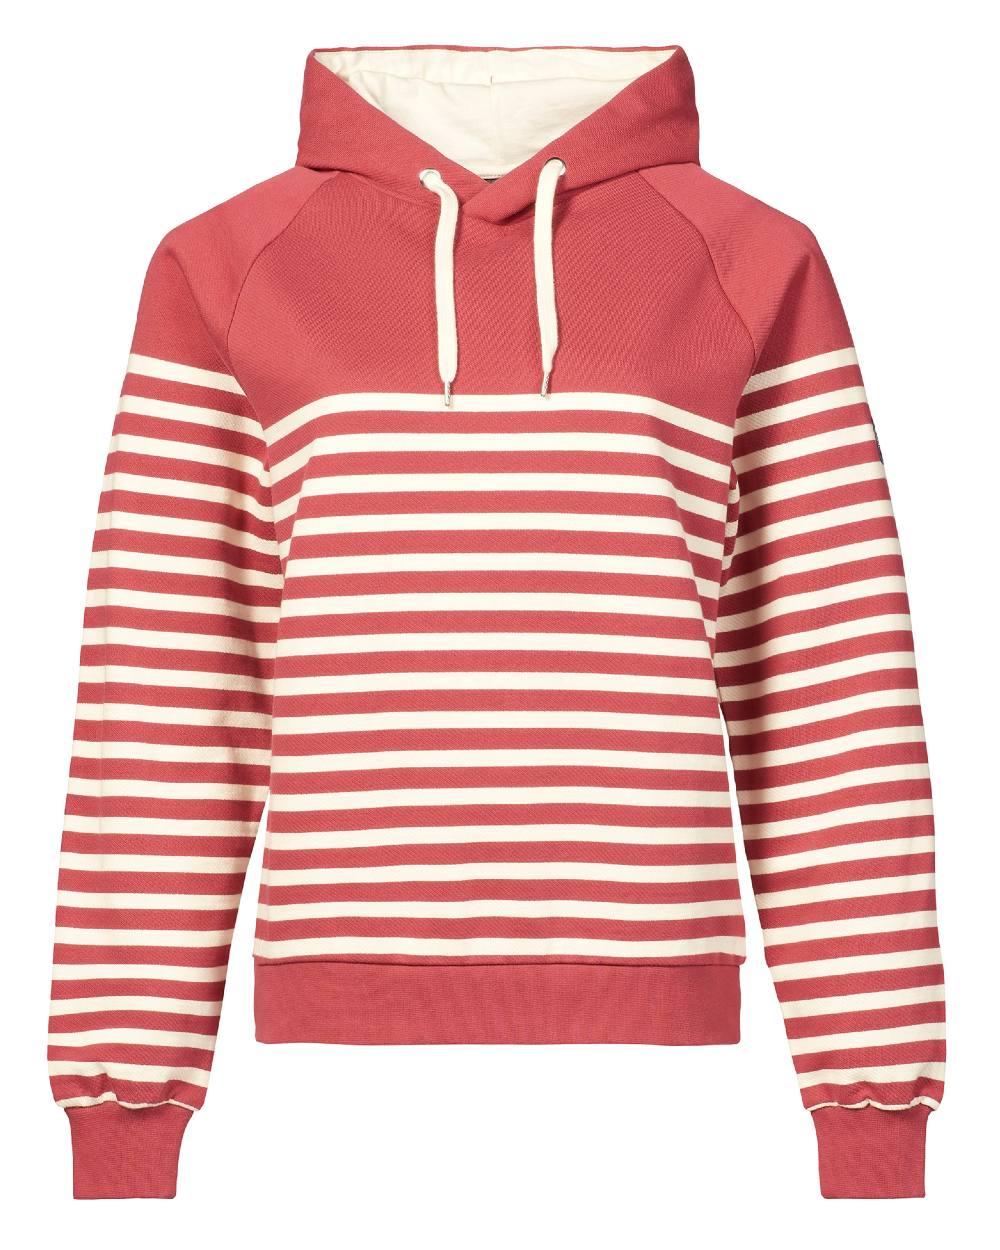 Astro Dust Coloured Musto Womens Marina Stripe Hoodie On A White Background 